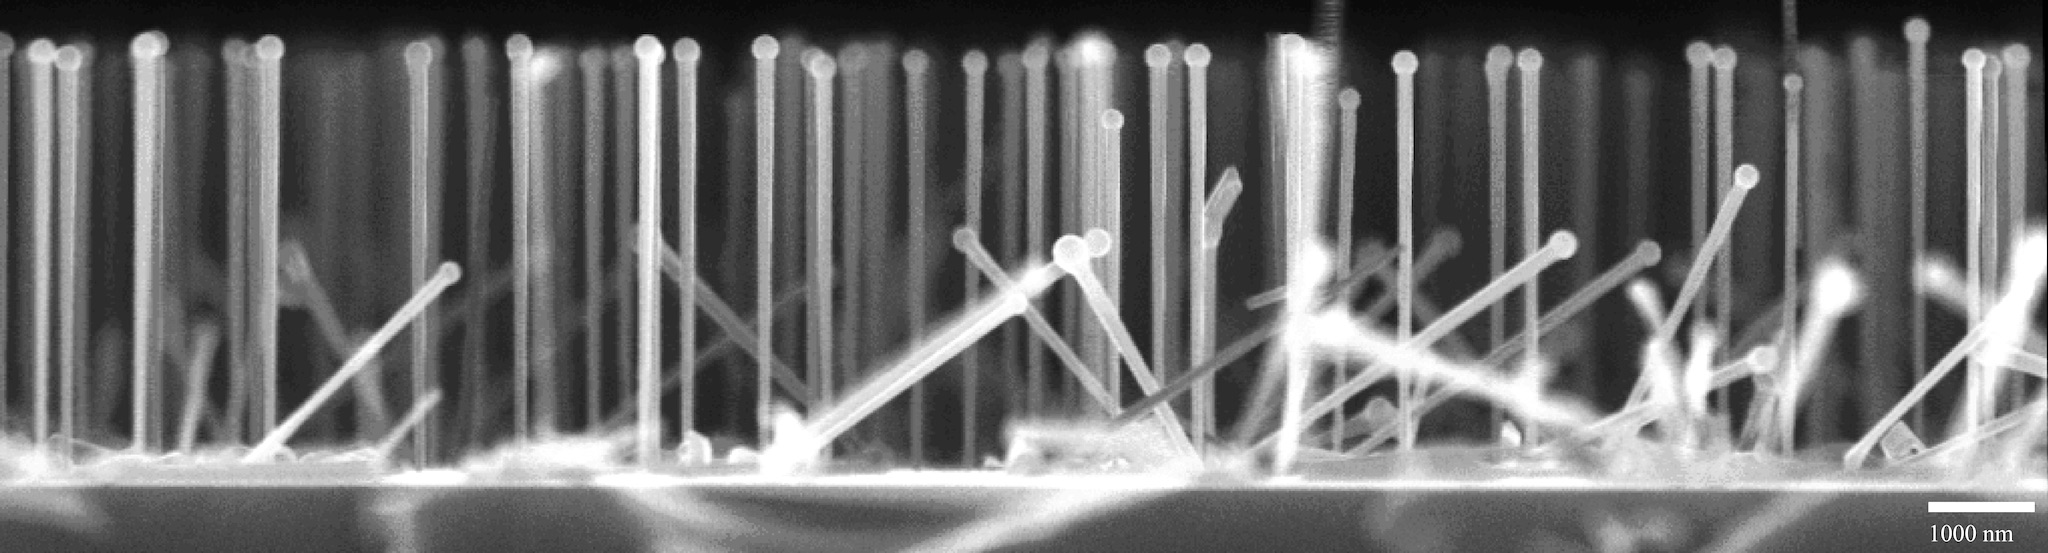 Electron microscope view of the fully grown nanowires.